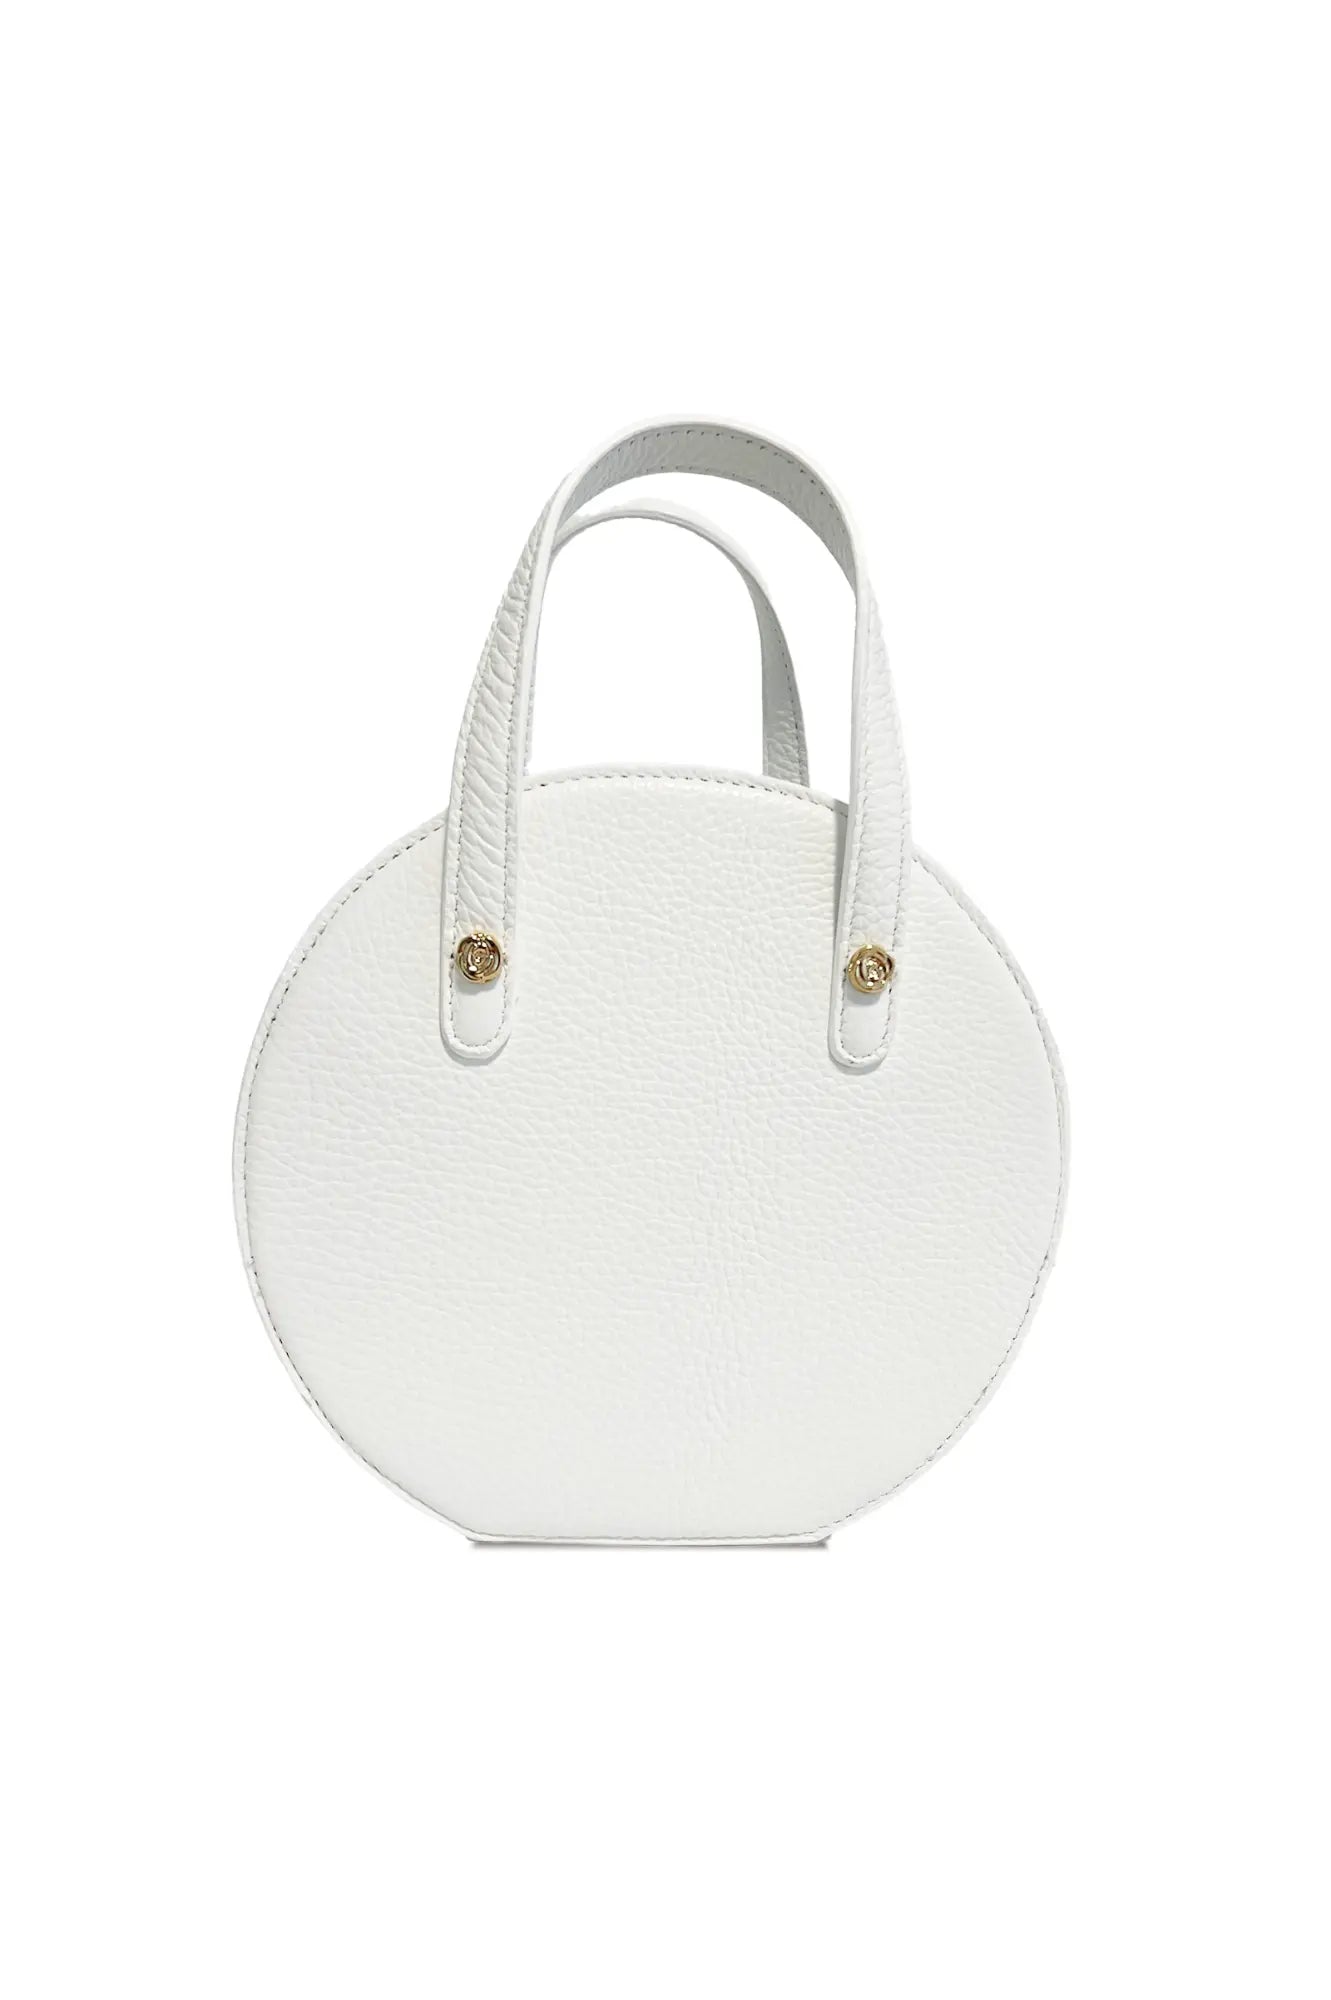 The Bella Rosa Collection Harper Hat Box Handbag in white leather, with two short handles and gold-tone hardware, isolated on a white background.